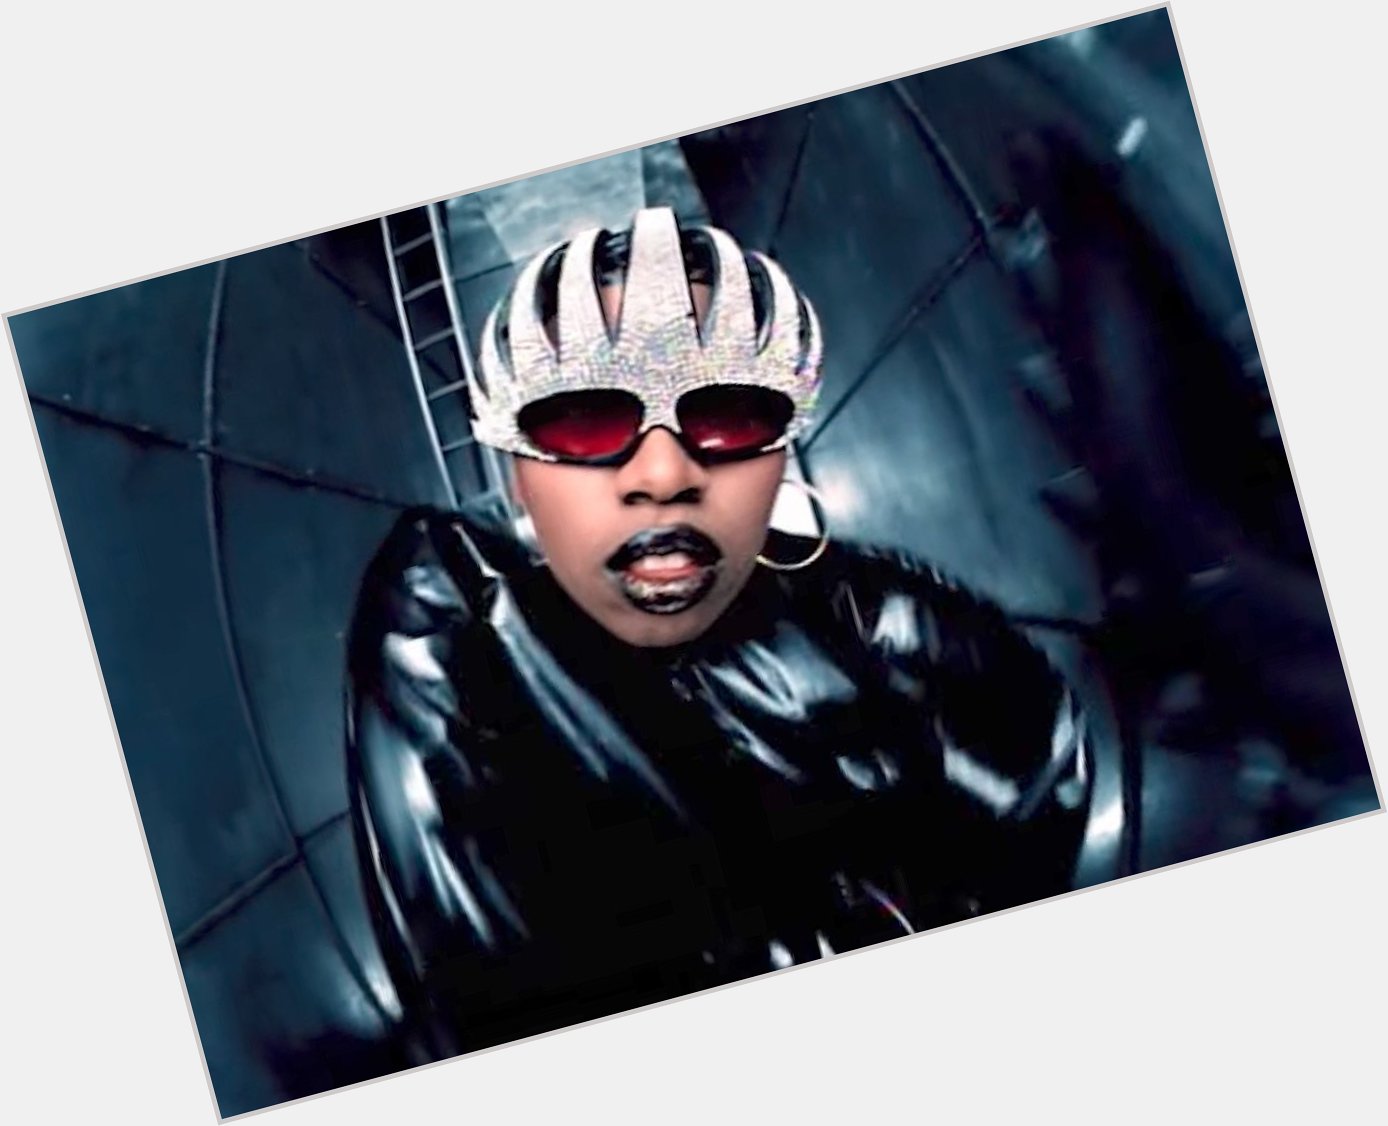 Please Join Us In Wishing A Happy 50th Birthday To The Iconic Missy Elliot! 